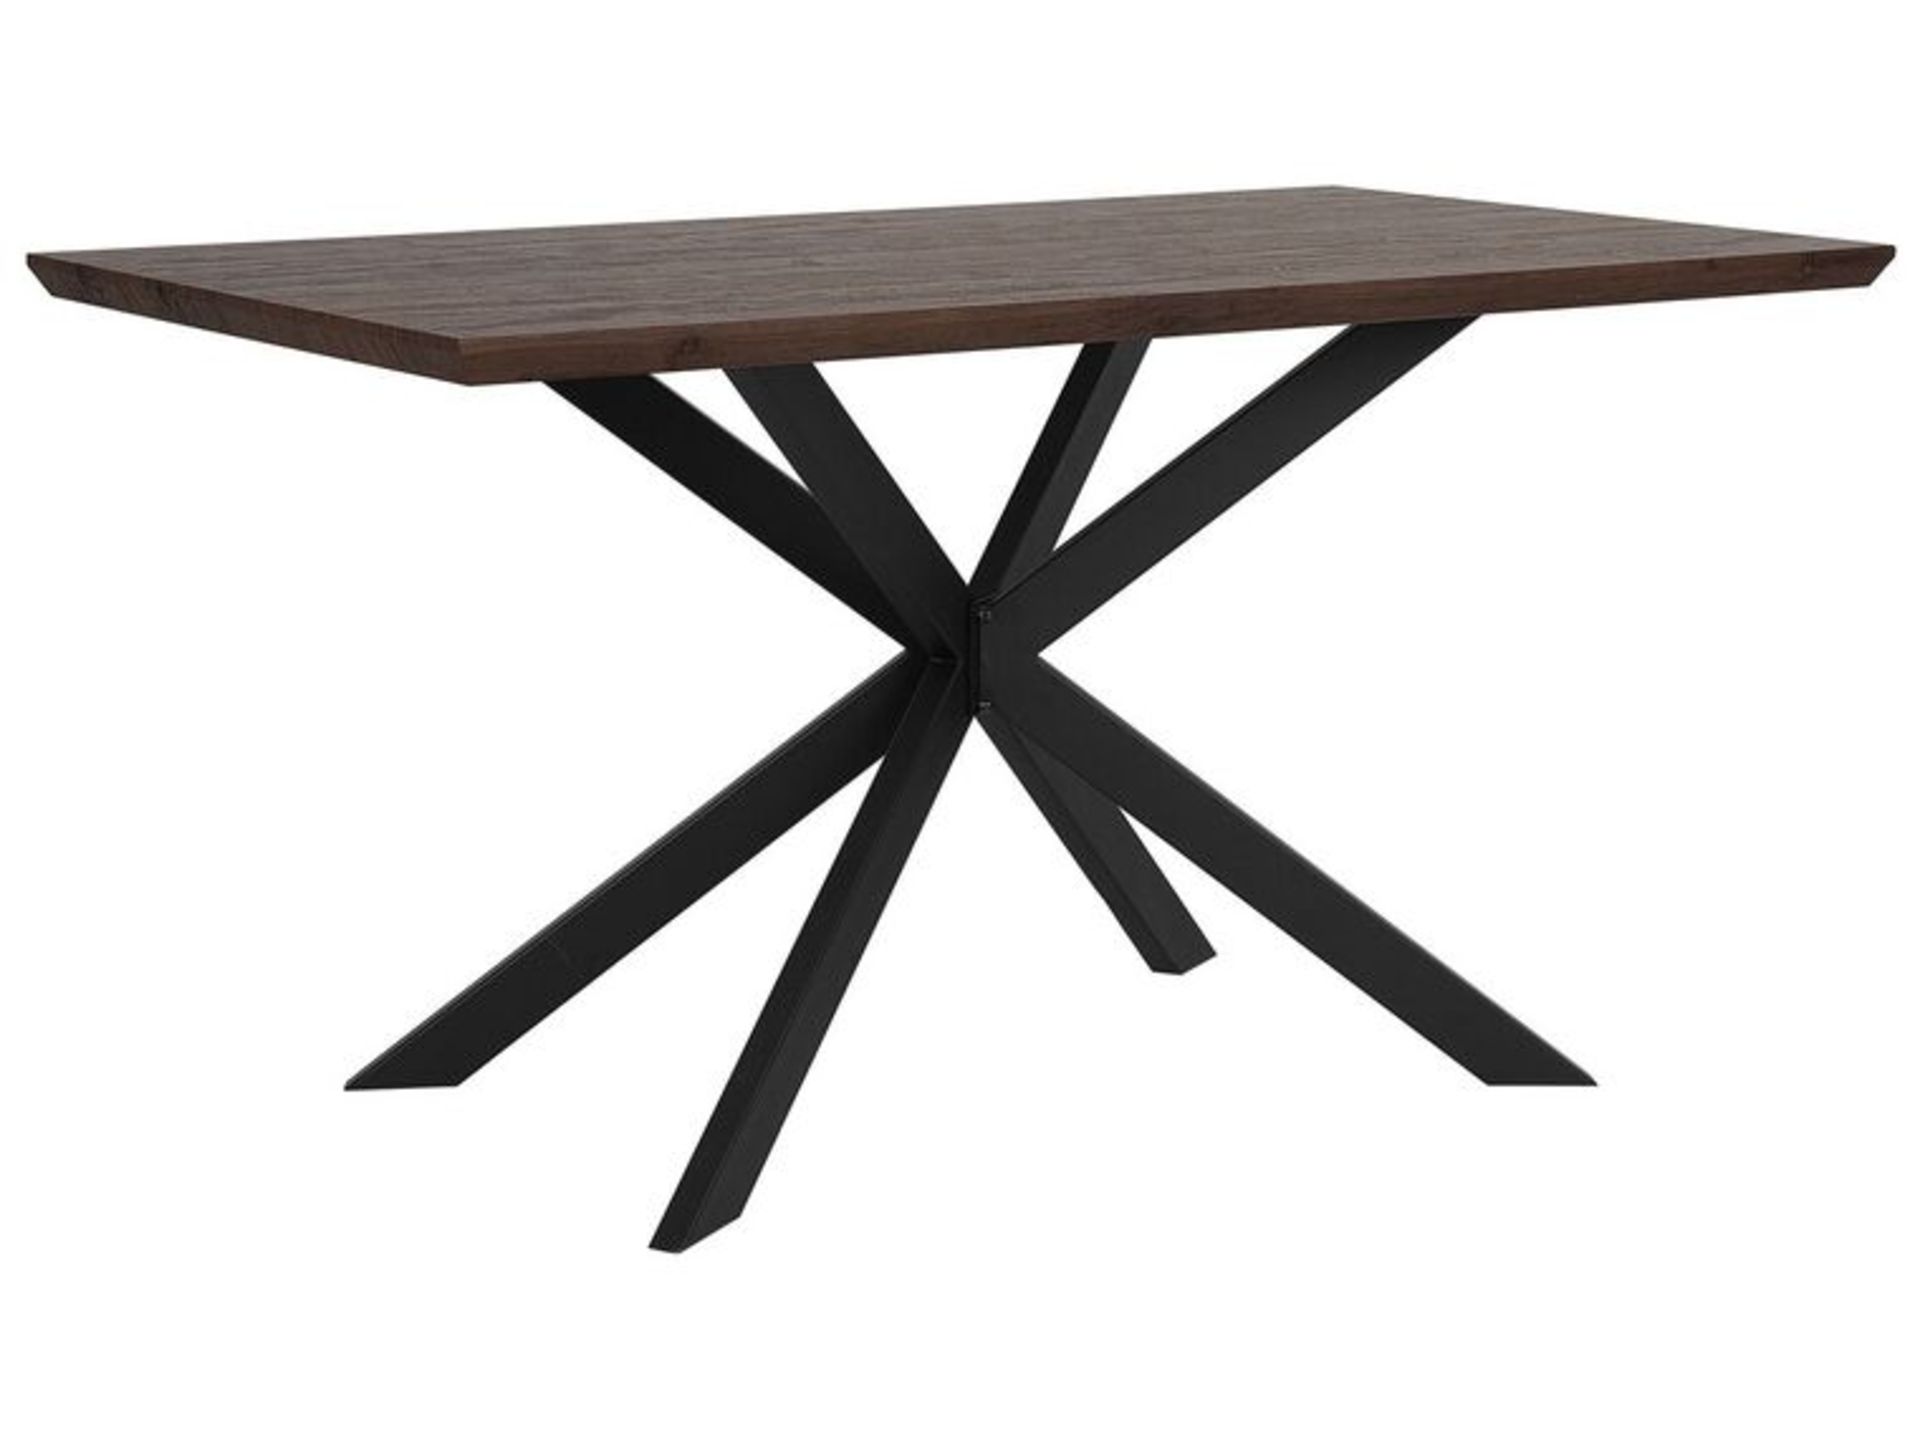 Spectra Dining Table 140 x 80 cm Dark Wood with Black. - SR6. RRP £529.99. Add an instant upgrade to